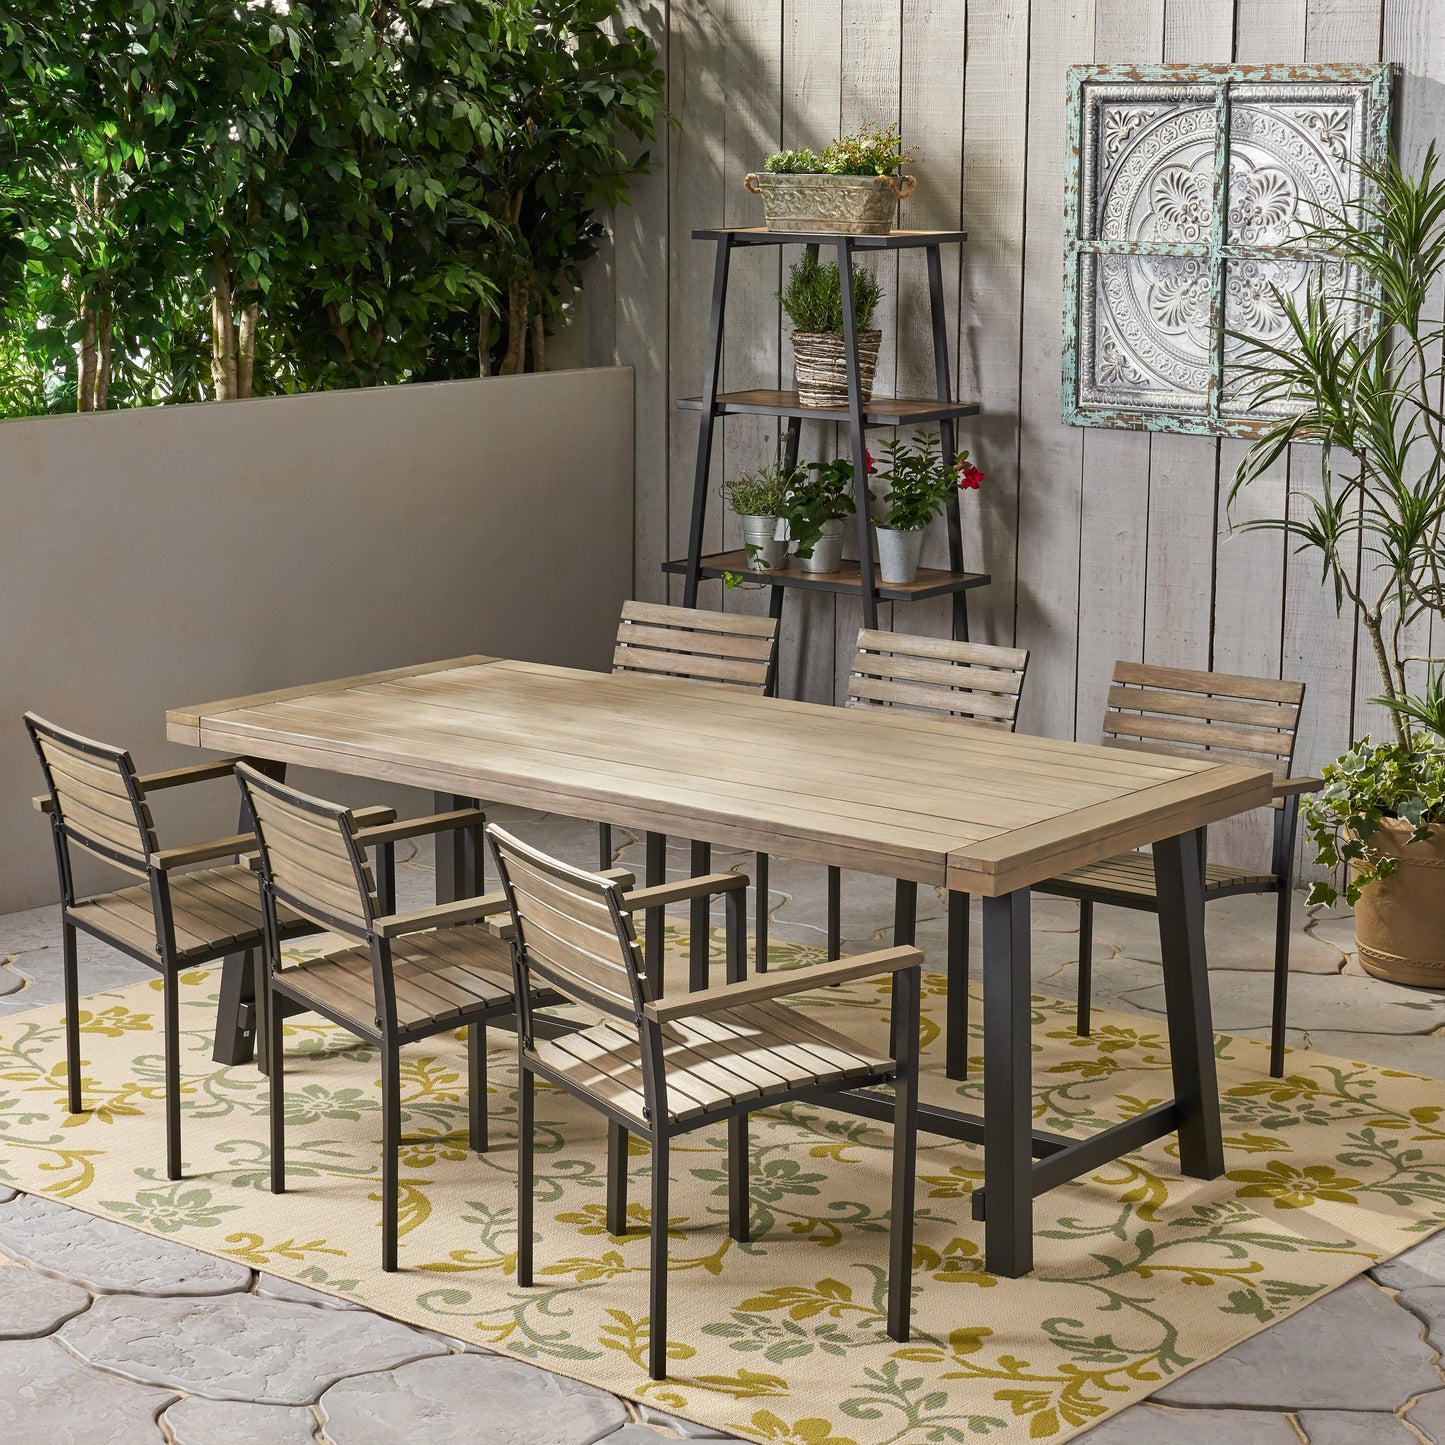 Charlize Outdoor Acacia Wood 6 Seater Dining Set